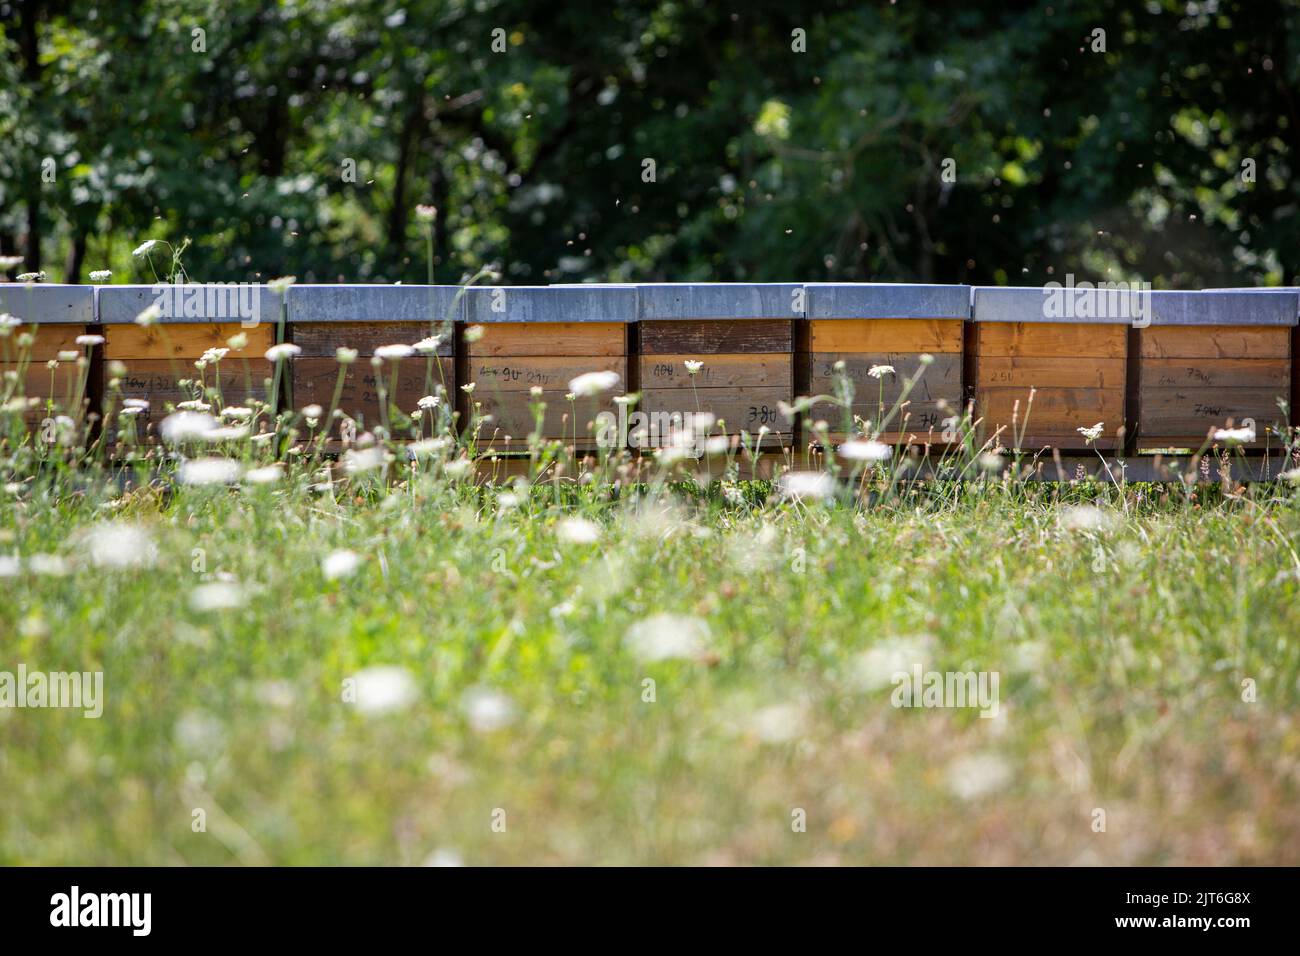 beehives and summer flowers in grass Stock Photo